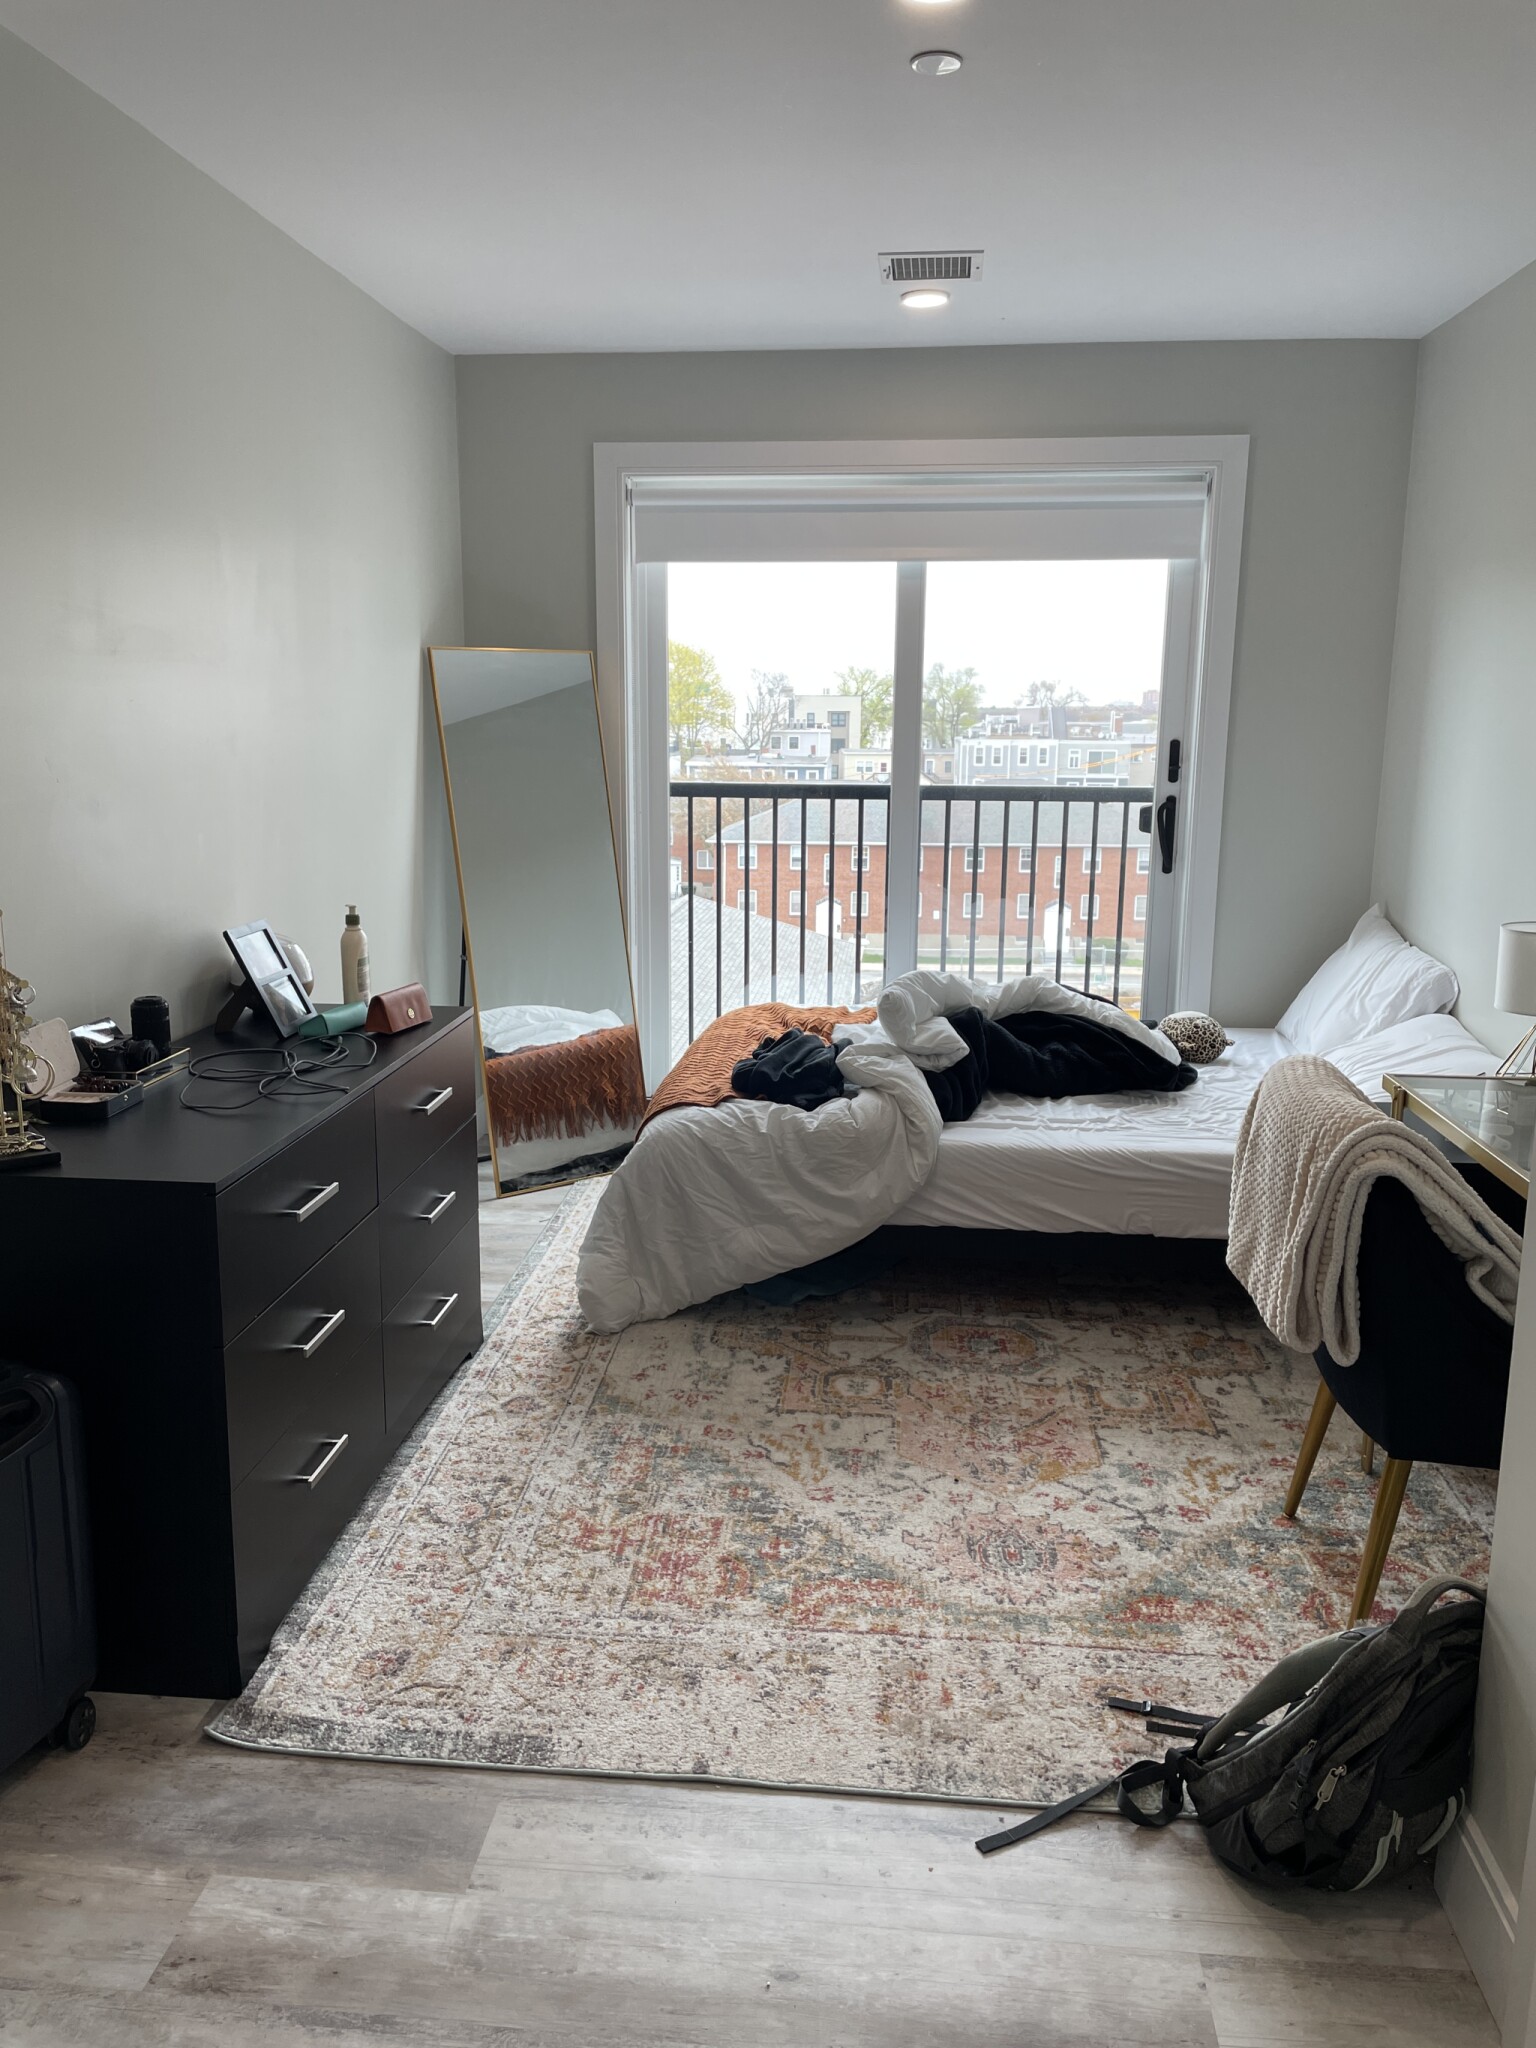 Photos of apartment on Old Colony Ave.,Boston MA 02127